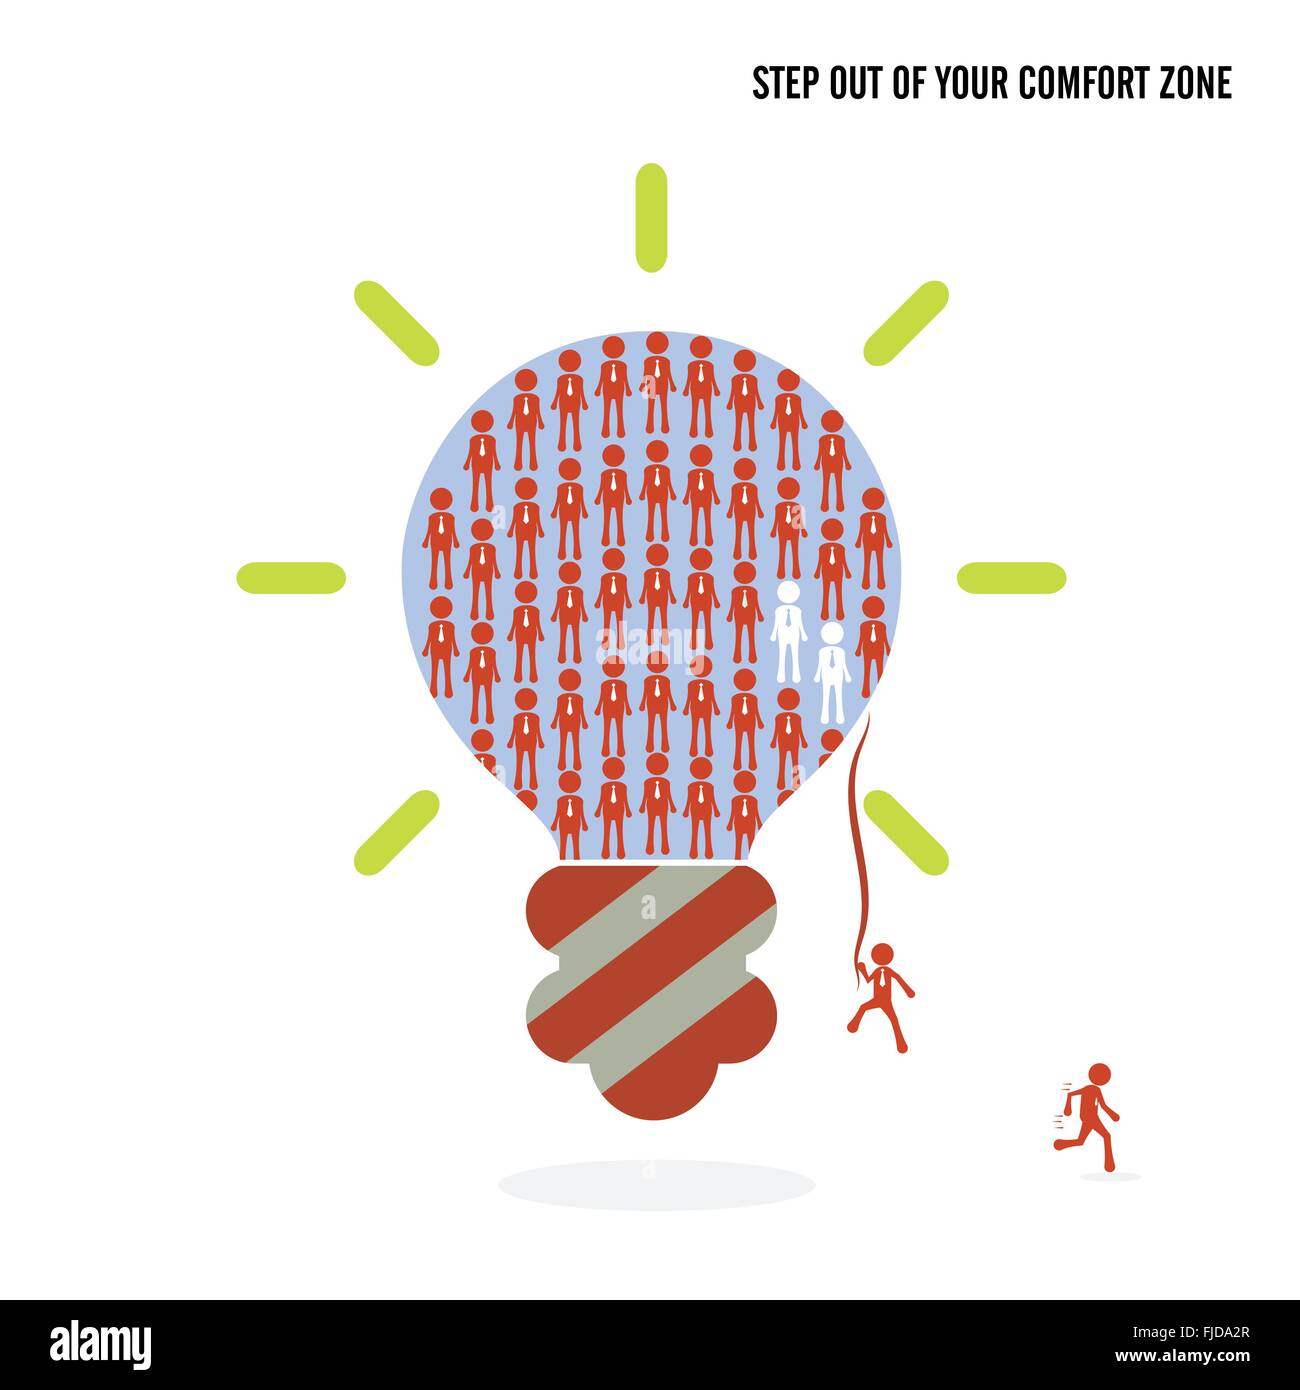 Step out of your comfort zone idea concept. Business cartoon idea symbol.Vector illustration Stock Vector